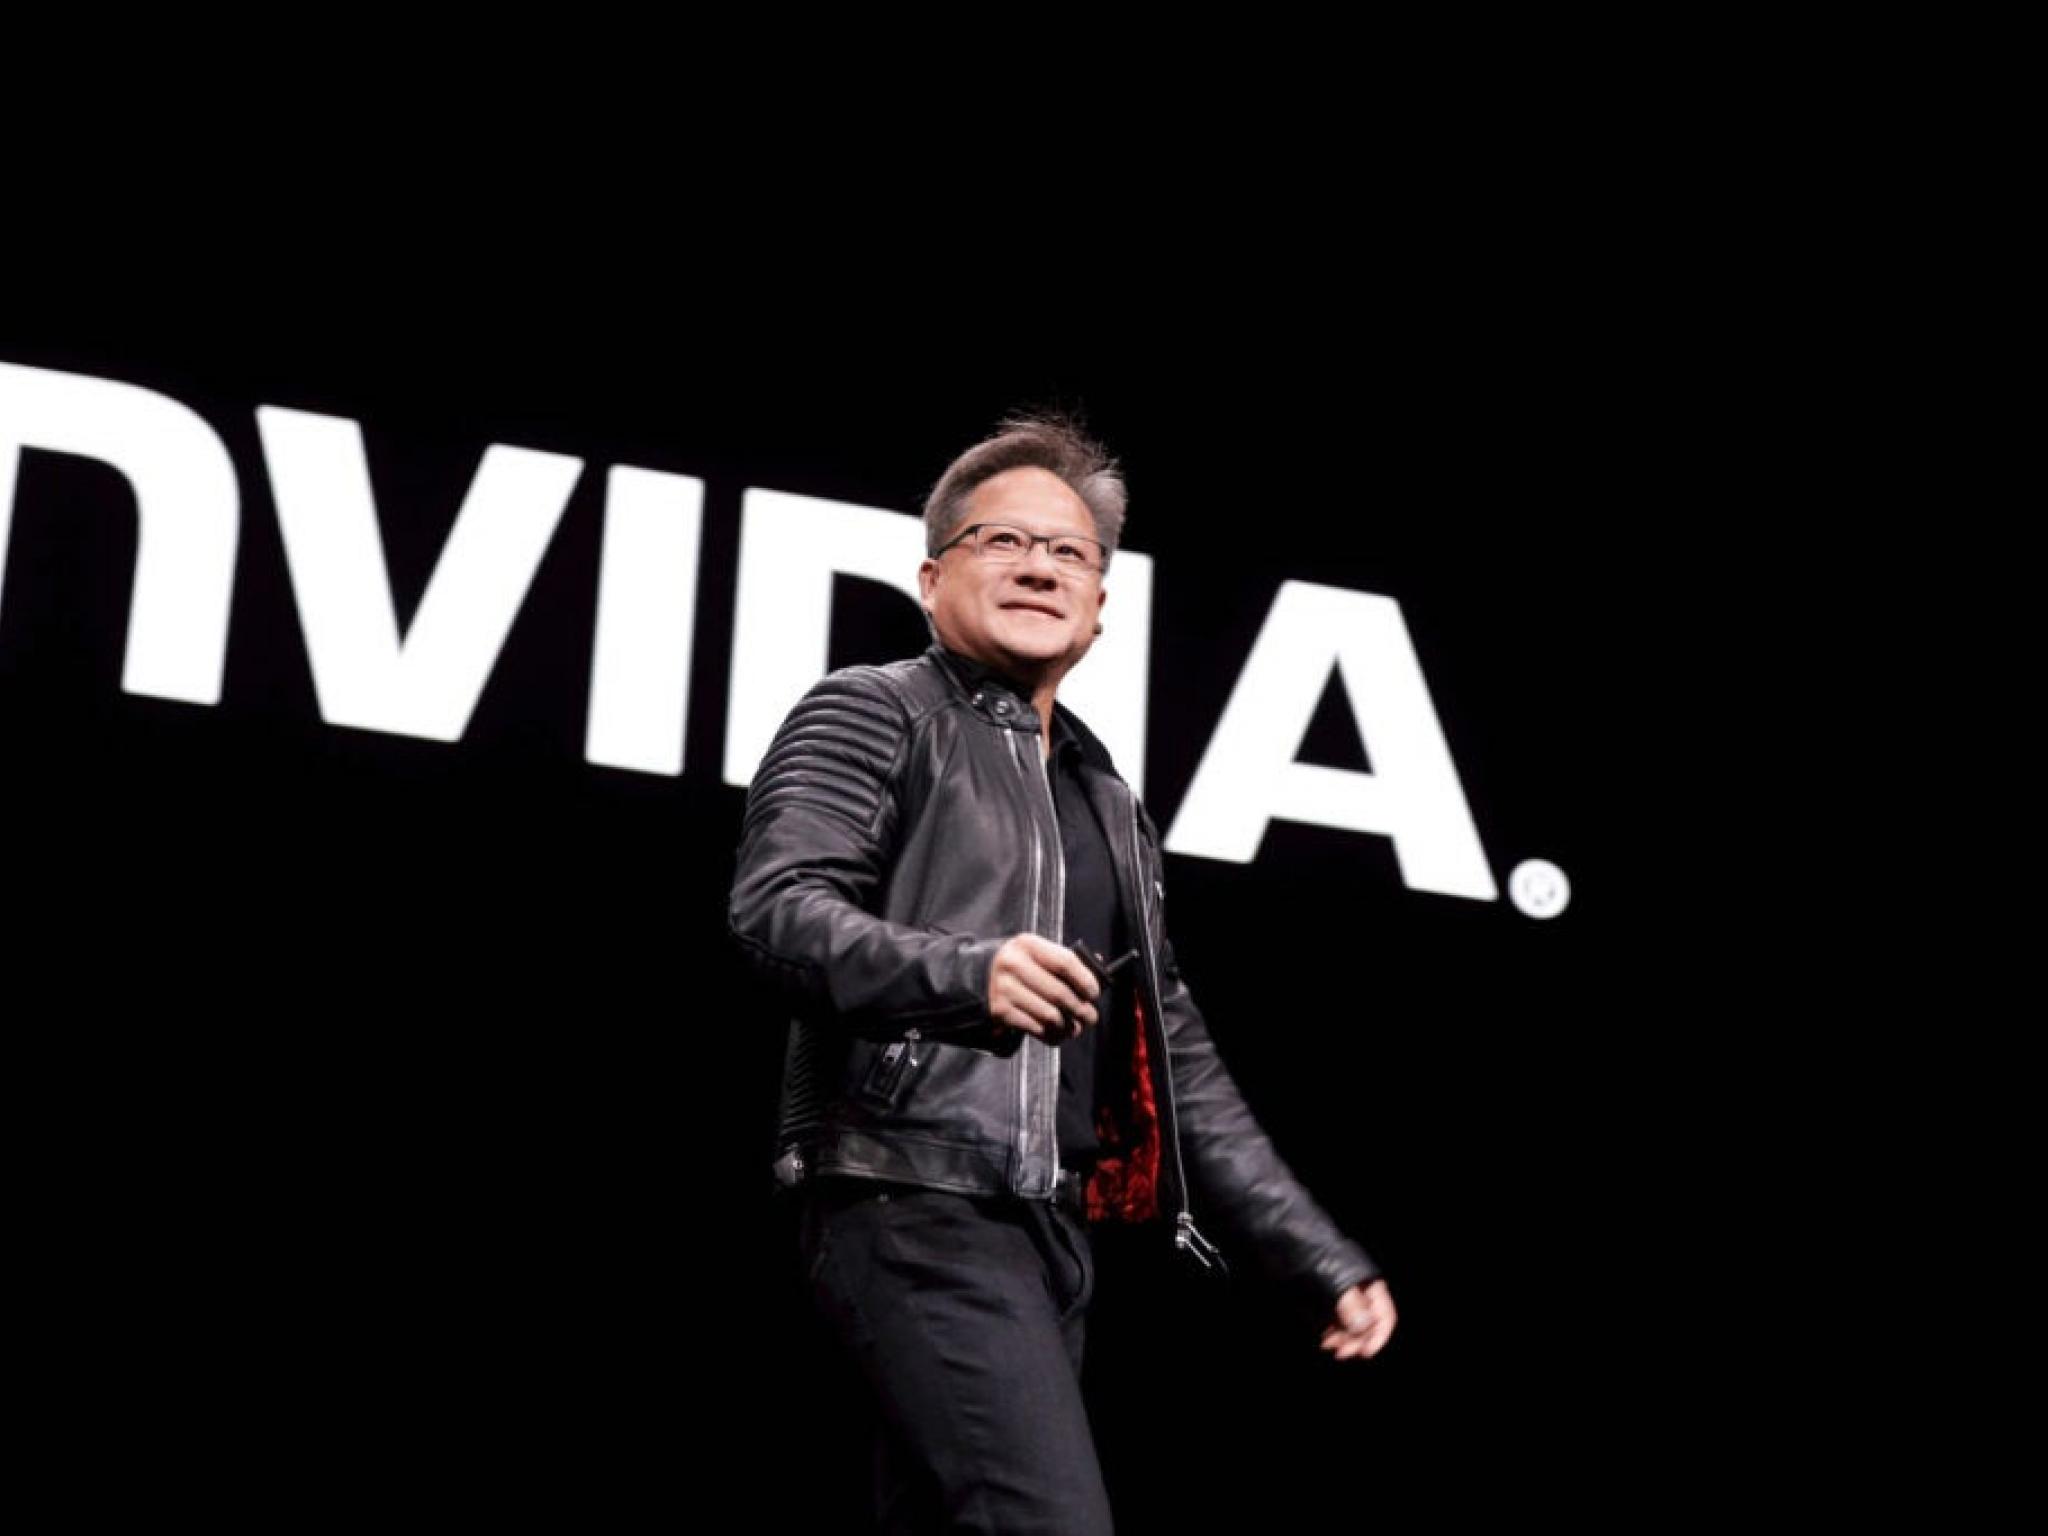  jim-cramer-says-nvidia-will-outshine-apple-microsoft-in-2025-future-earnings-ask-yourself-does-any-company-match-jensen-and-nvidia-right-now 